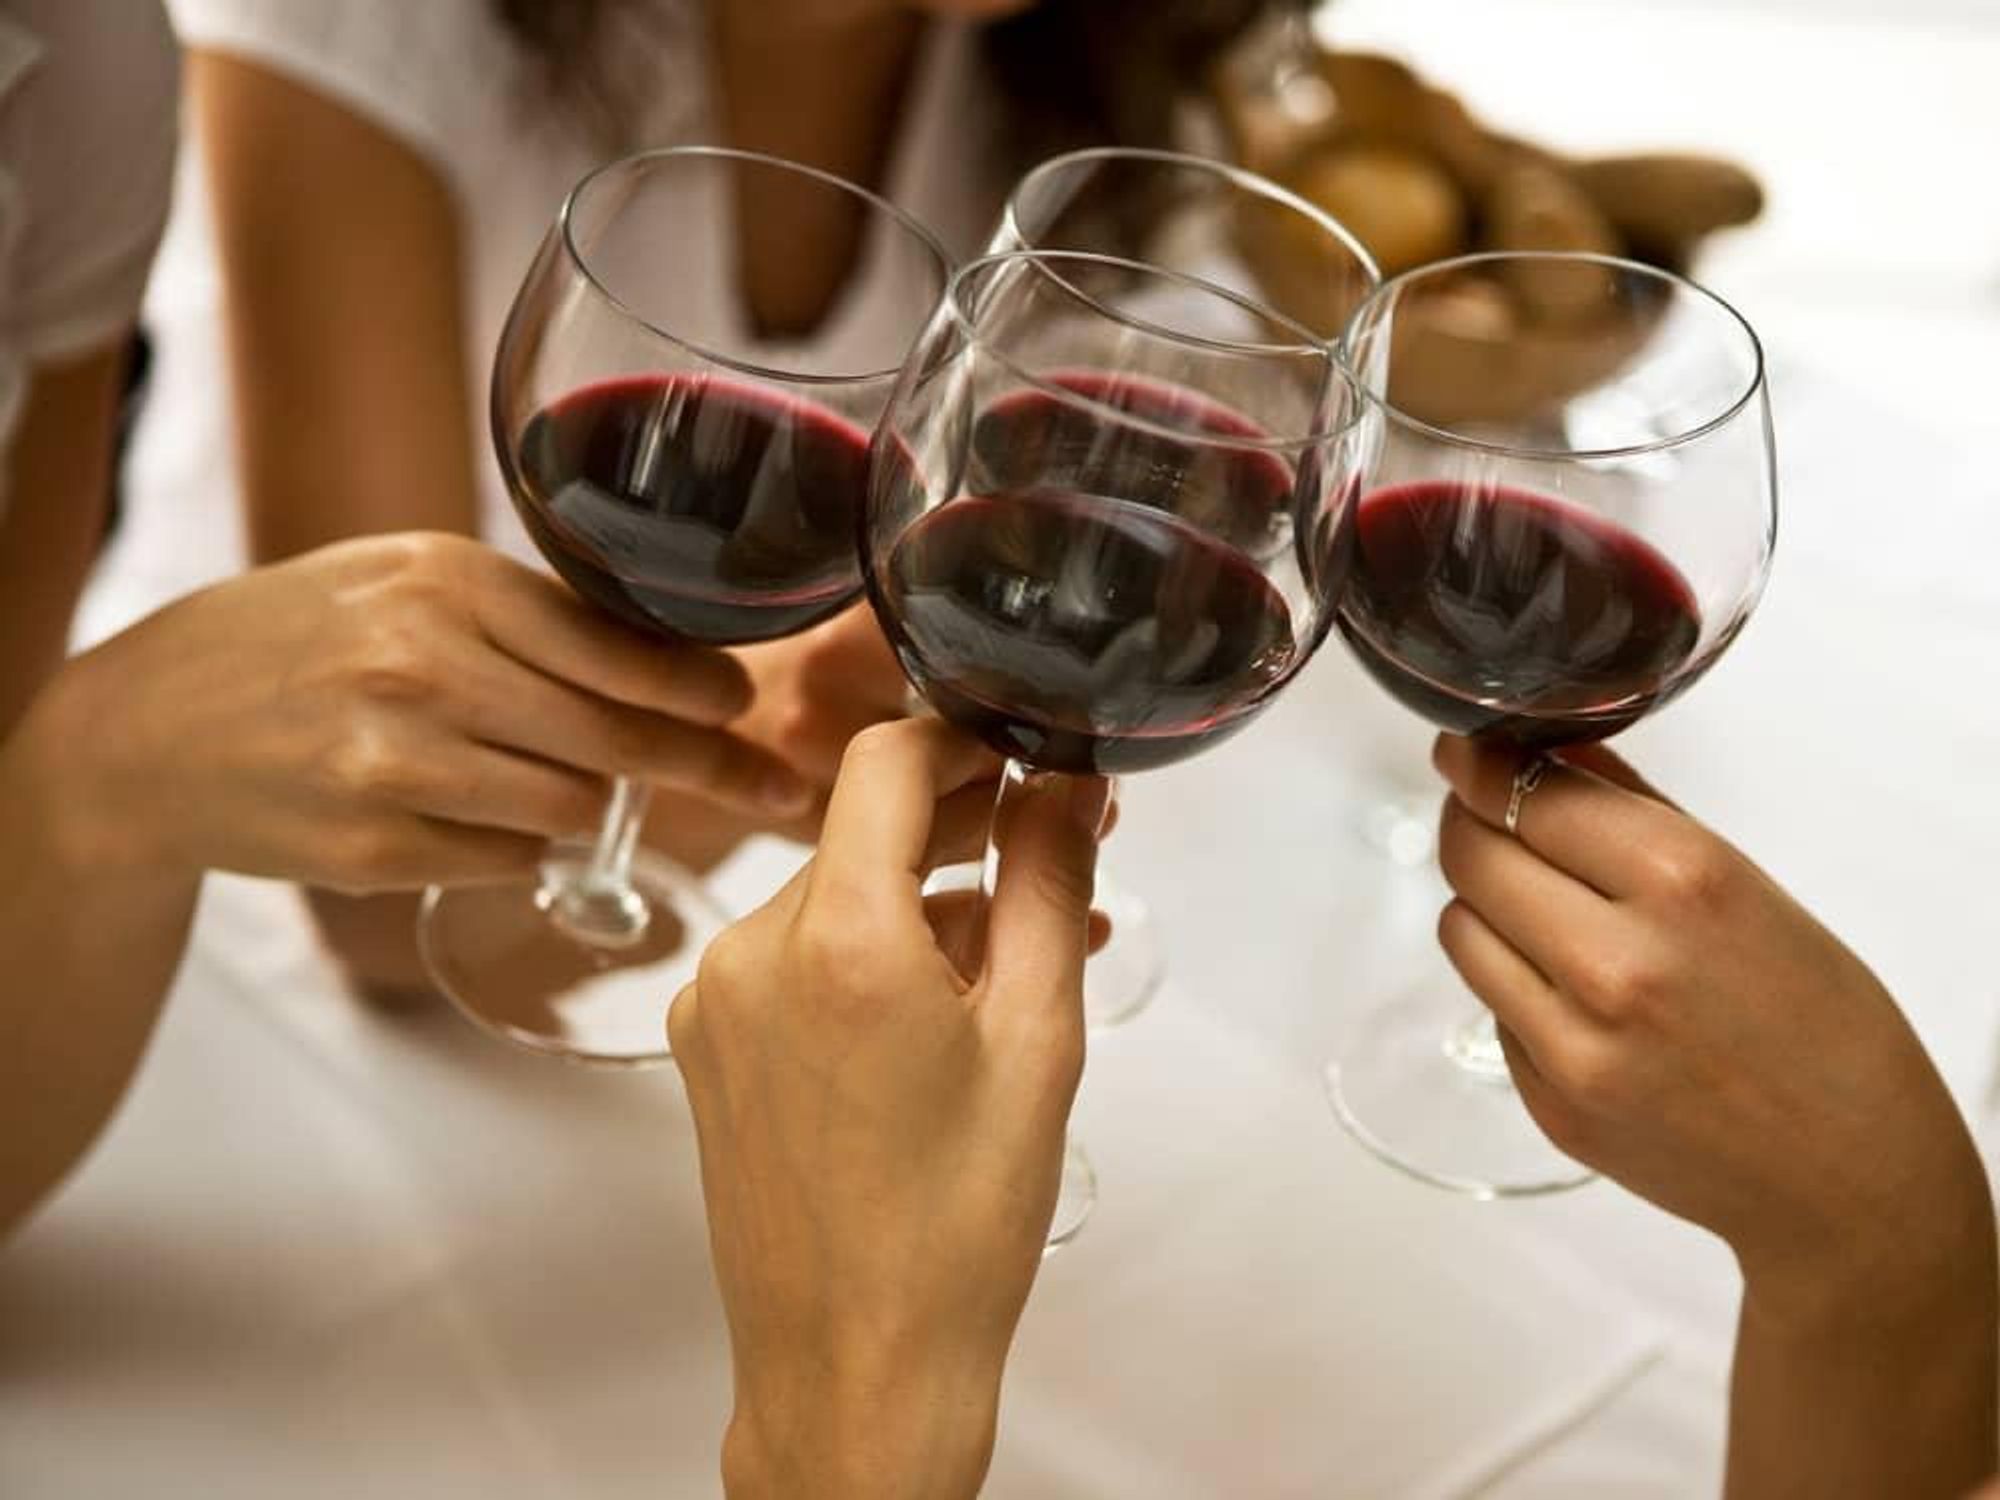 Girls toasting with wine glasses